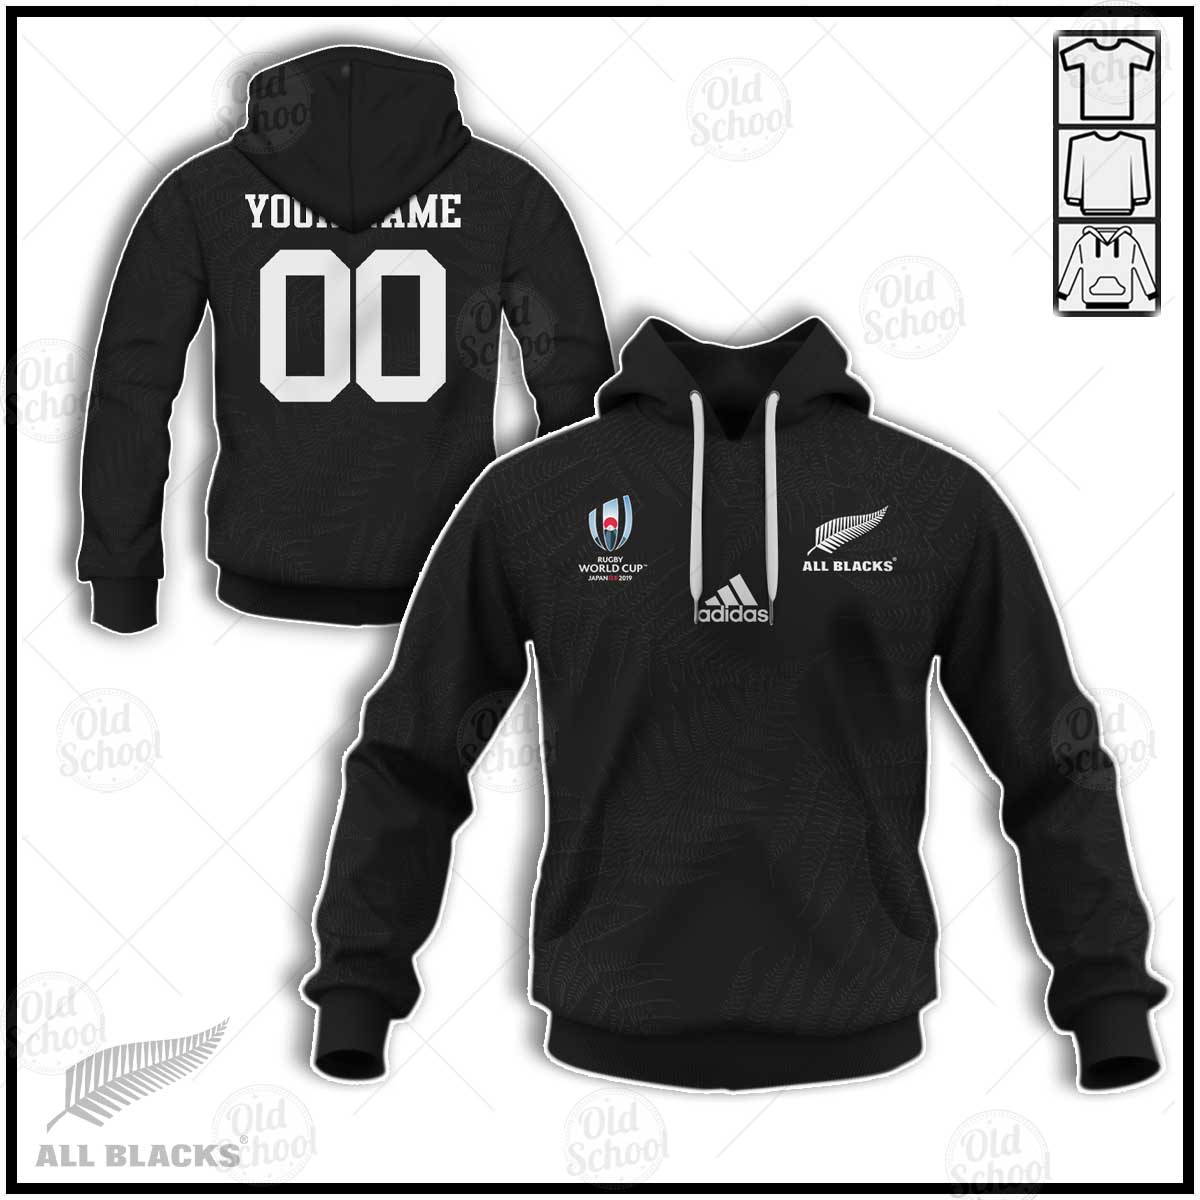 Personalise New Zealand All Blacks Rugby World Cup Jersey